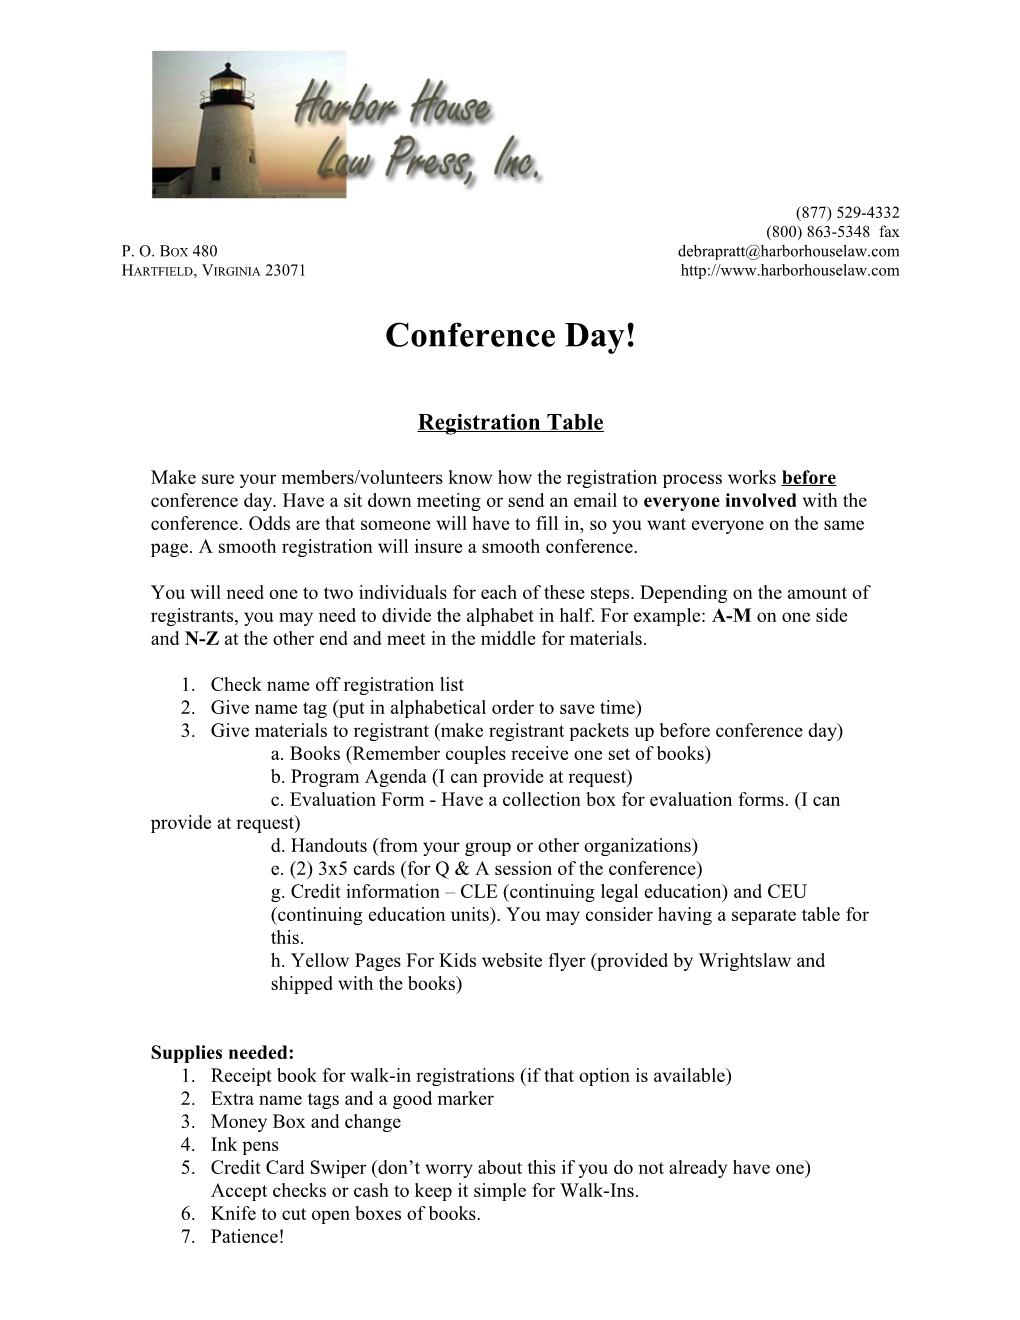 Things to Consider for Your Conference